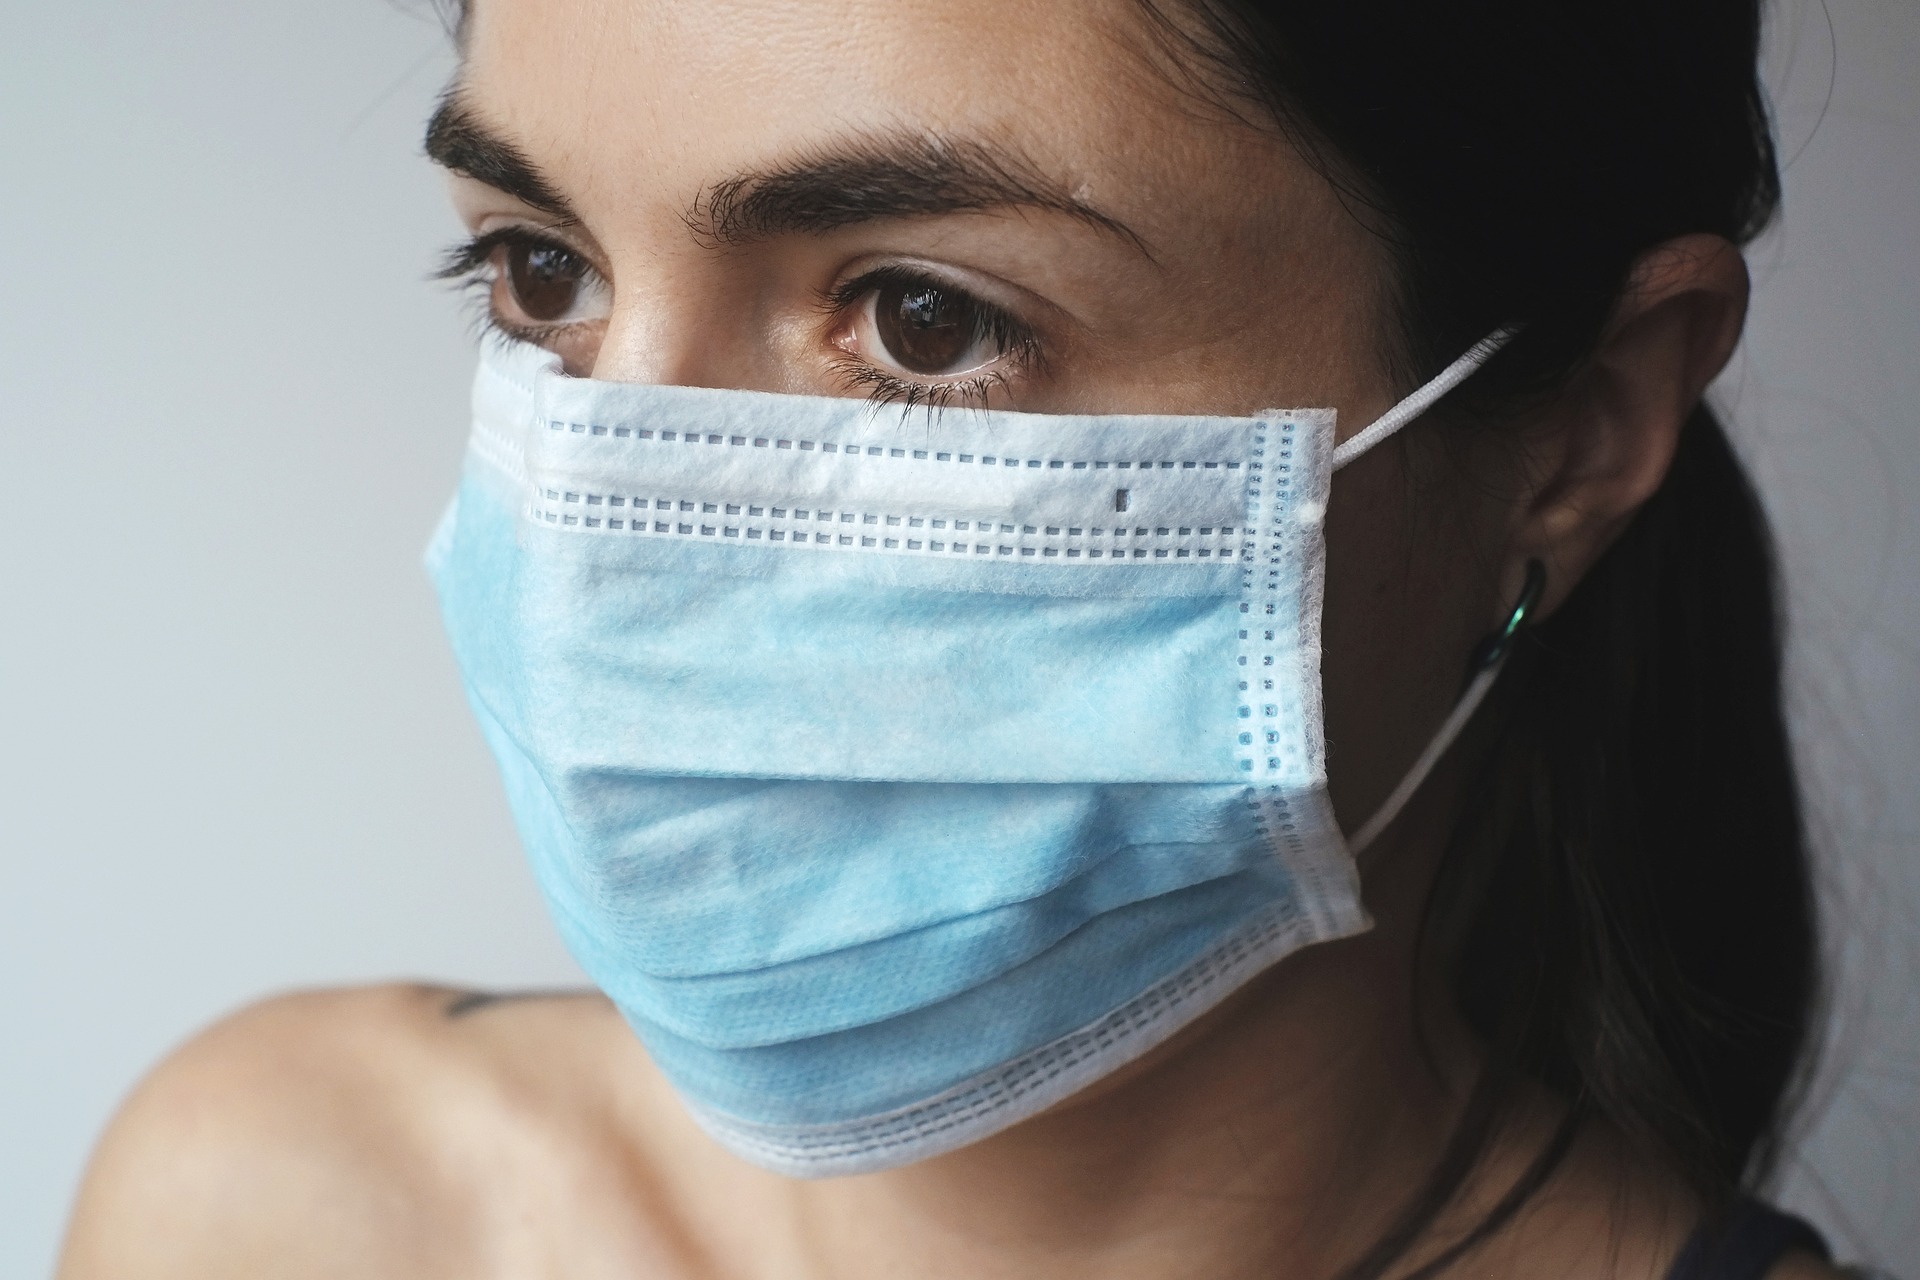 Mask-free Monday comes to Japan as government eases COVID guidelines